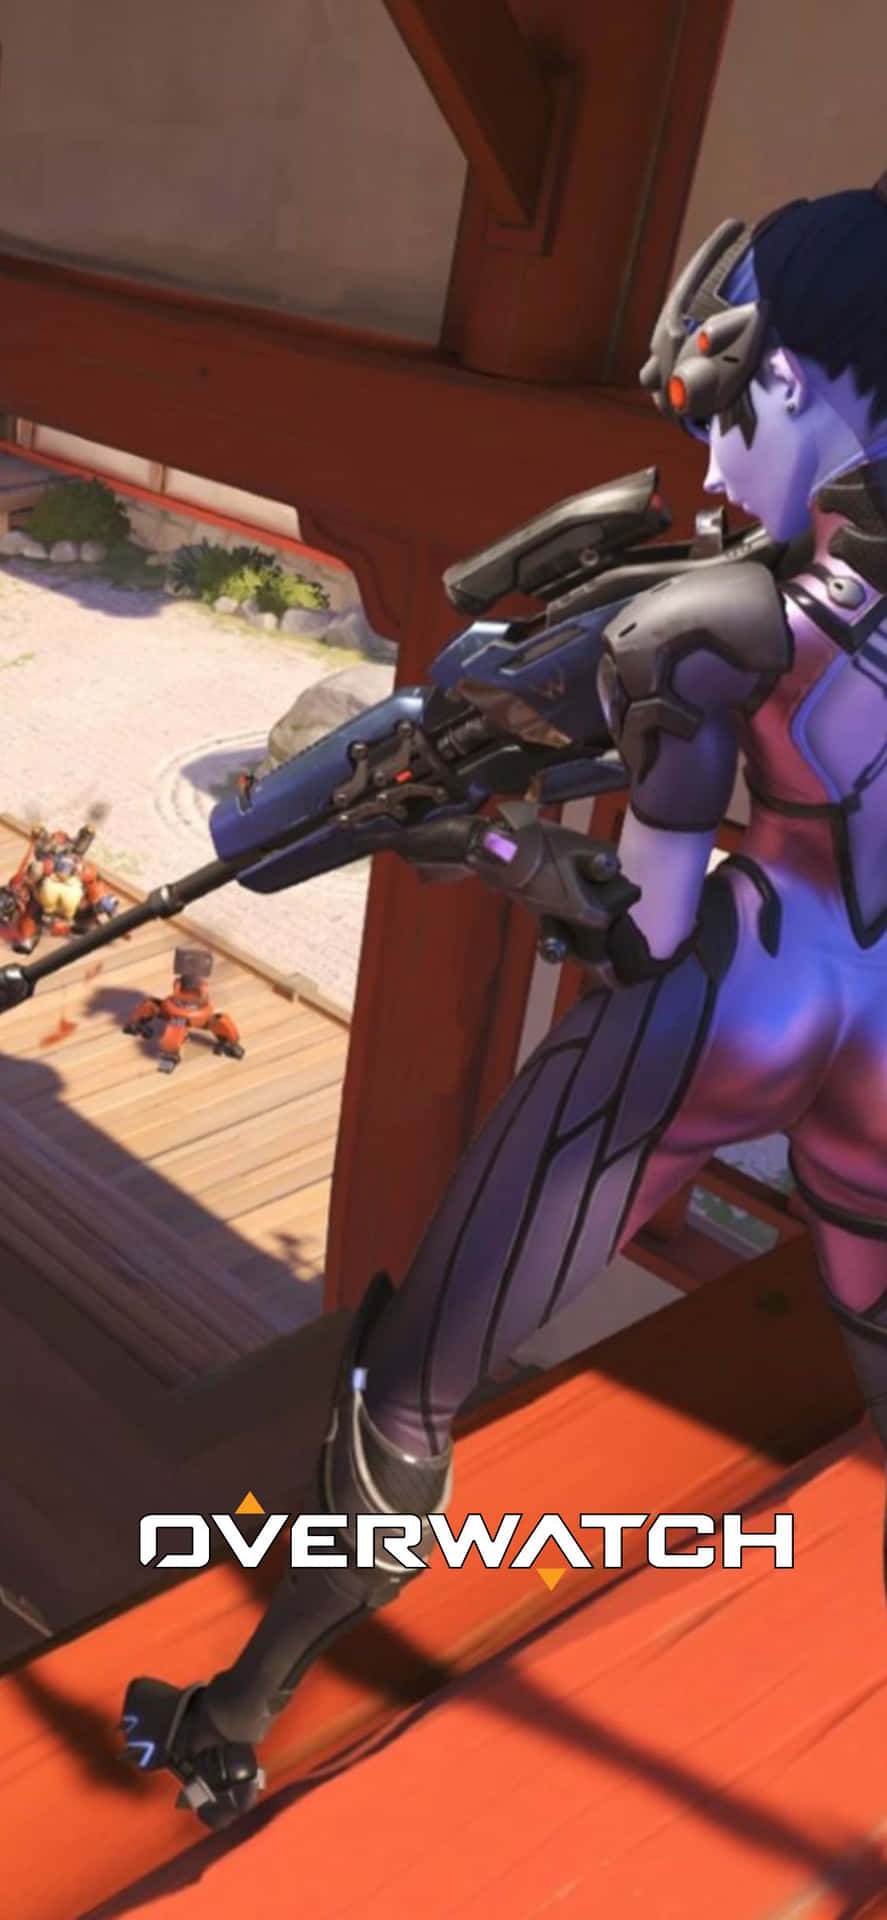 Outwit your enemies with iPhone X and Overwatch